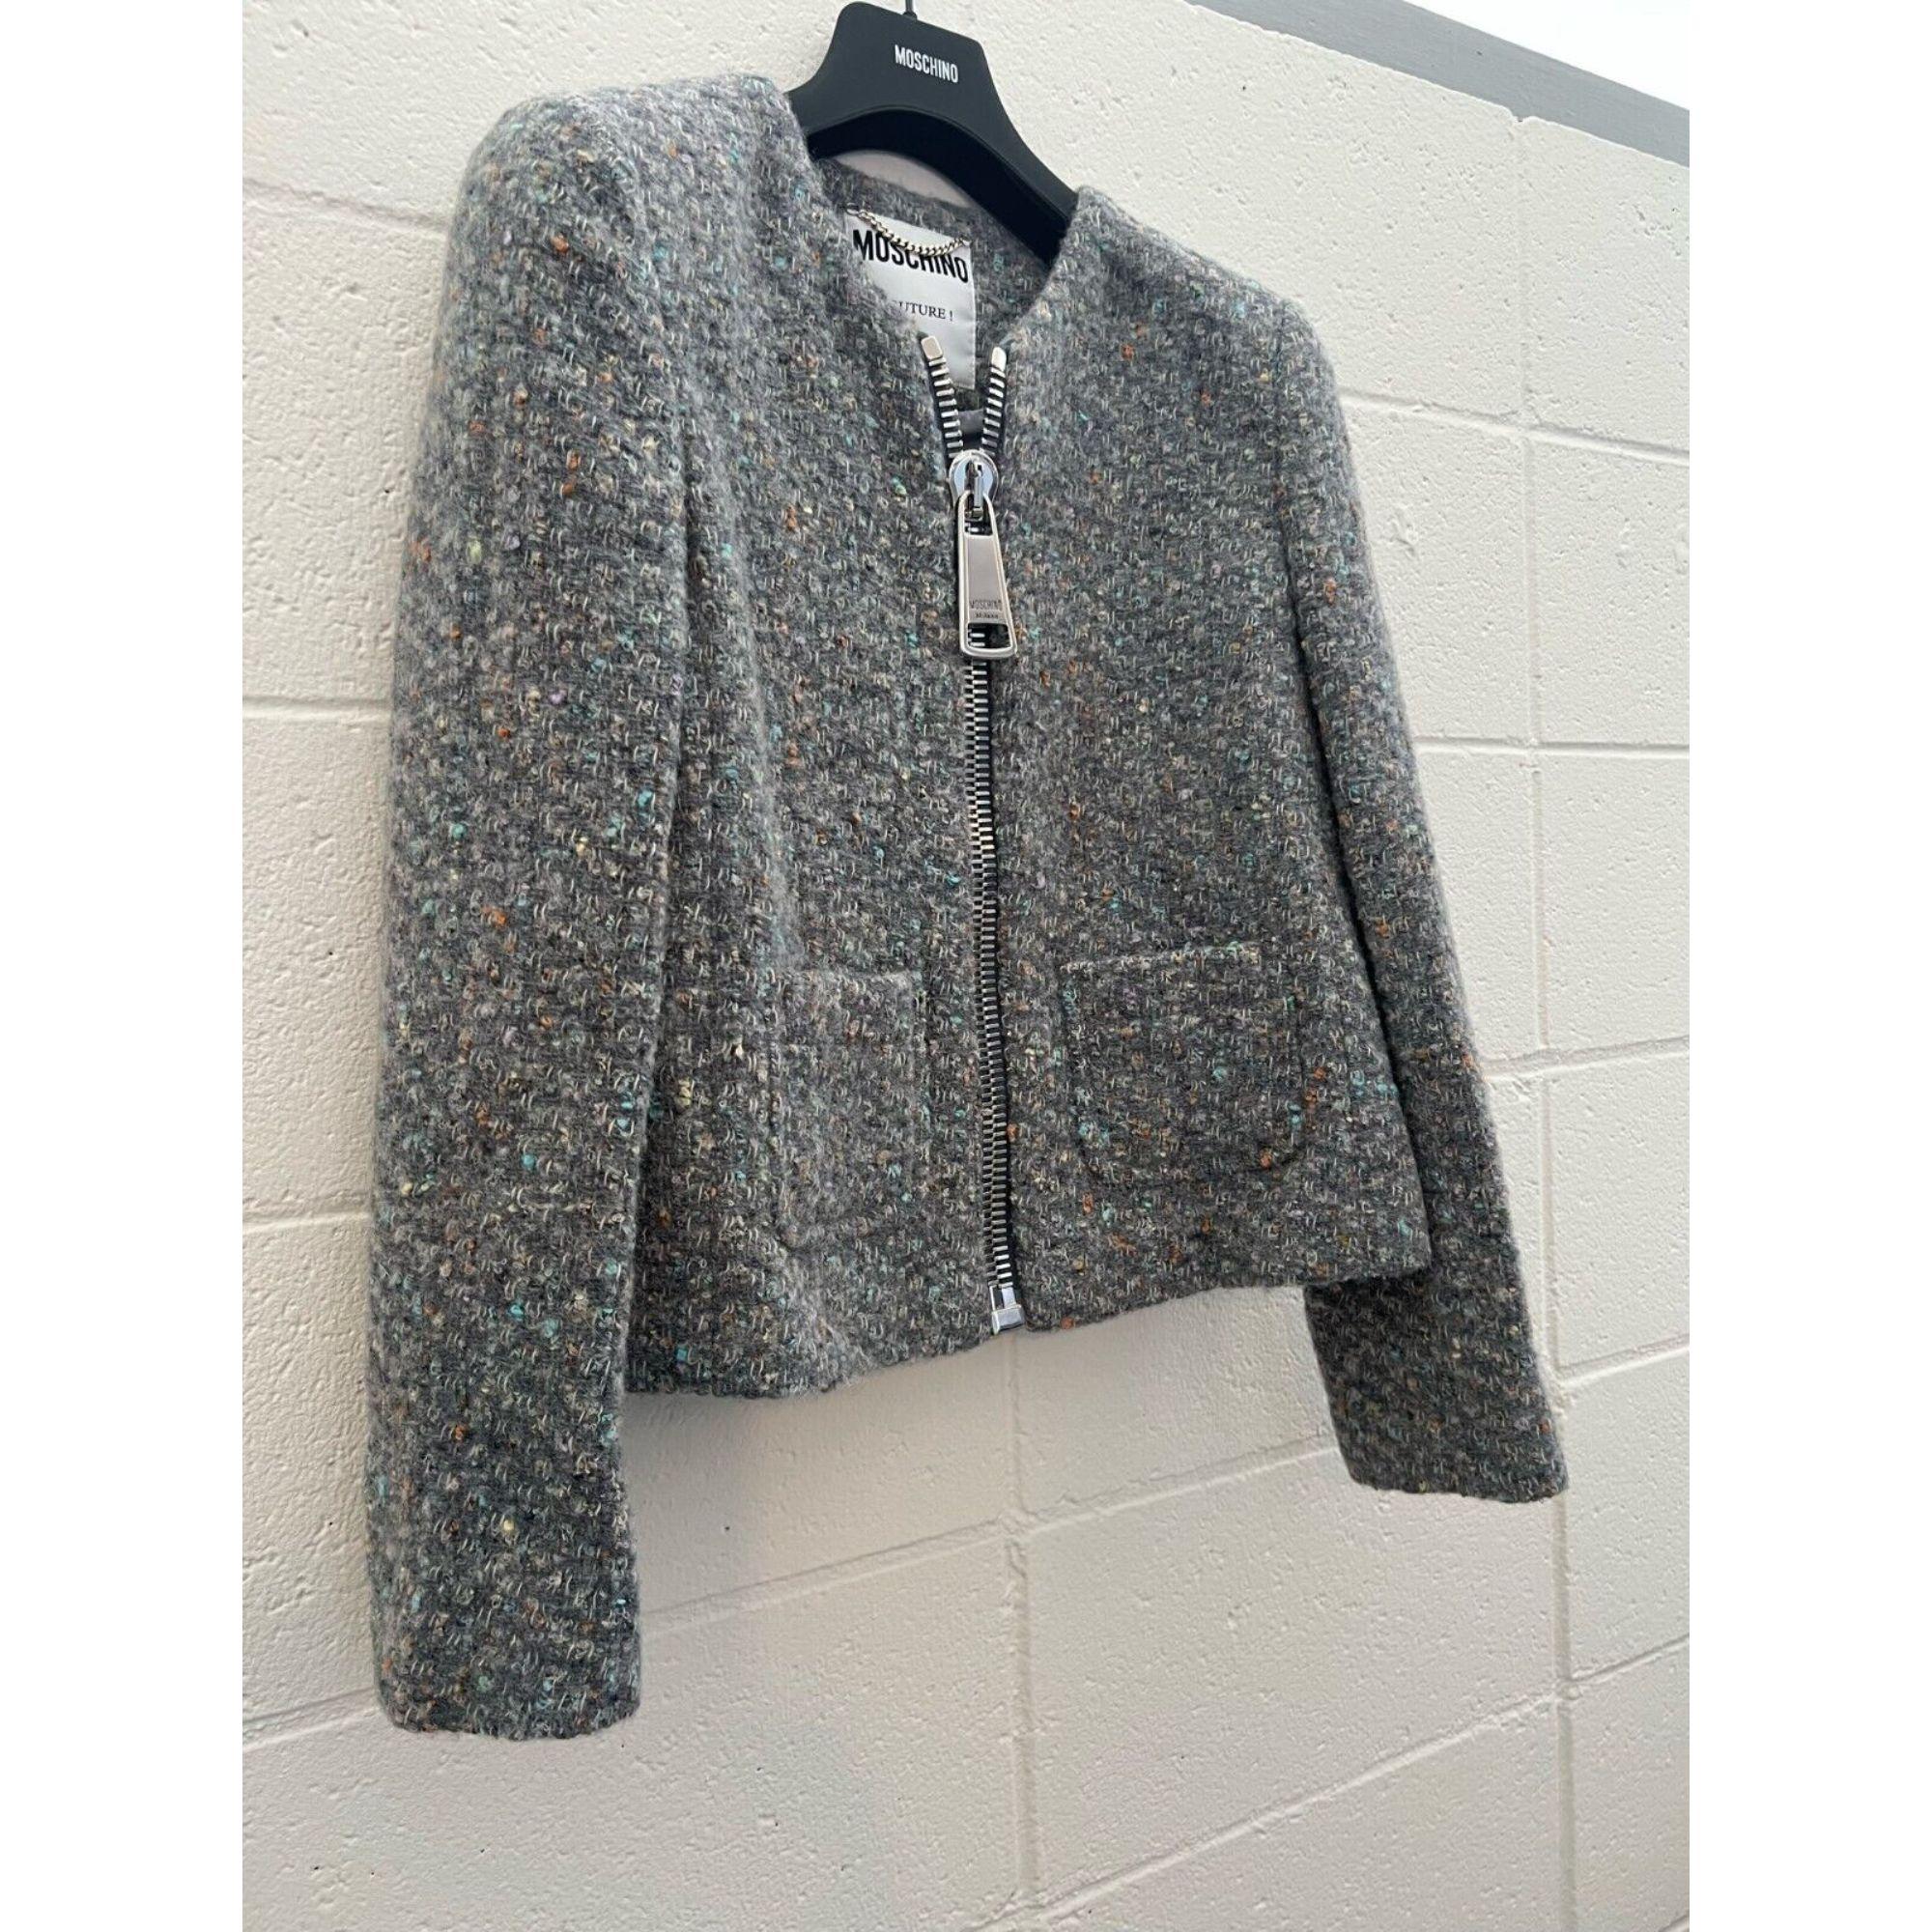 AW20 Moschino Couture Boucle Wool Jacket by Jeremy Scott, Size US 8 For Sale 3